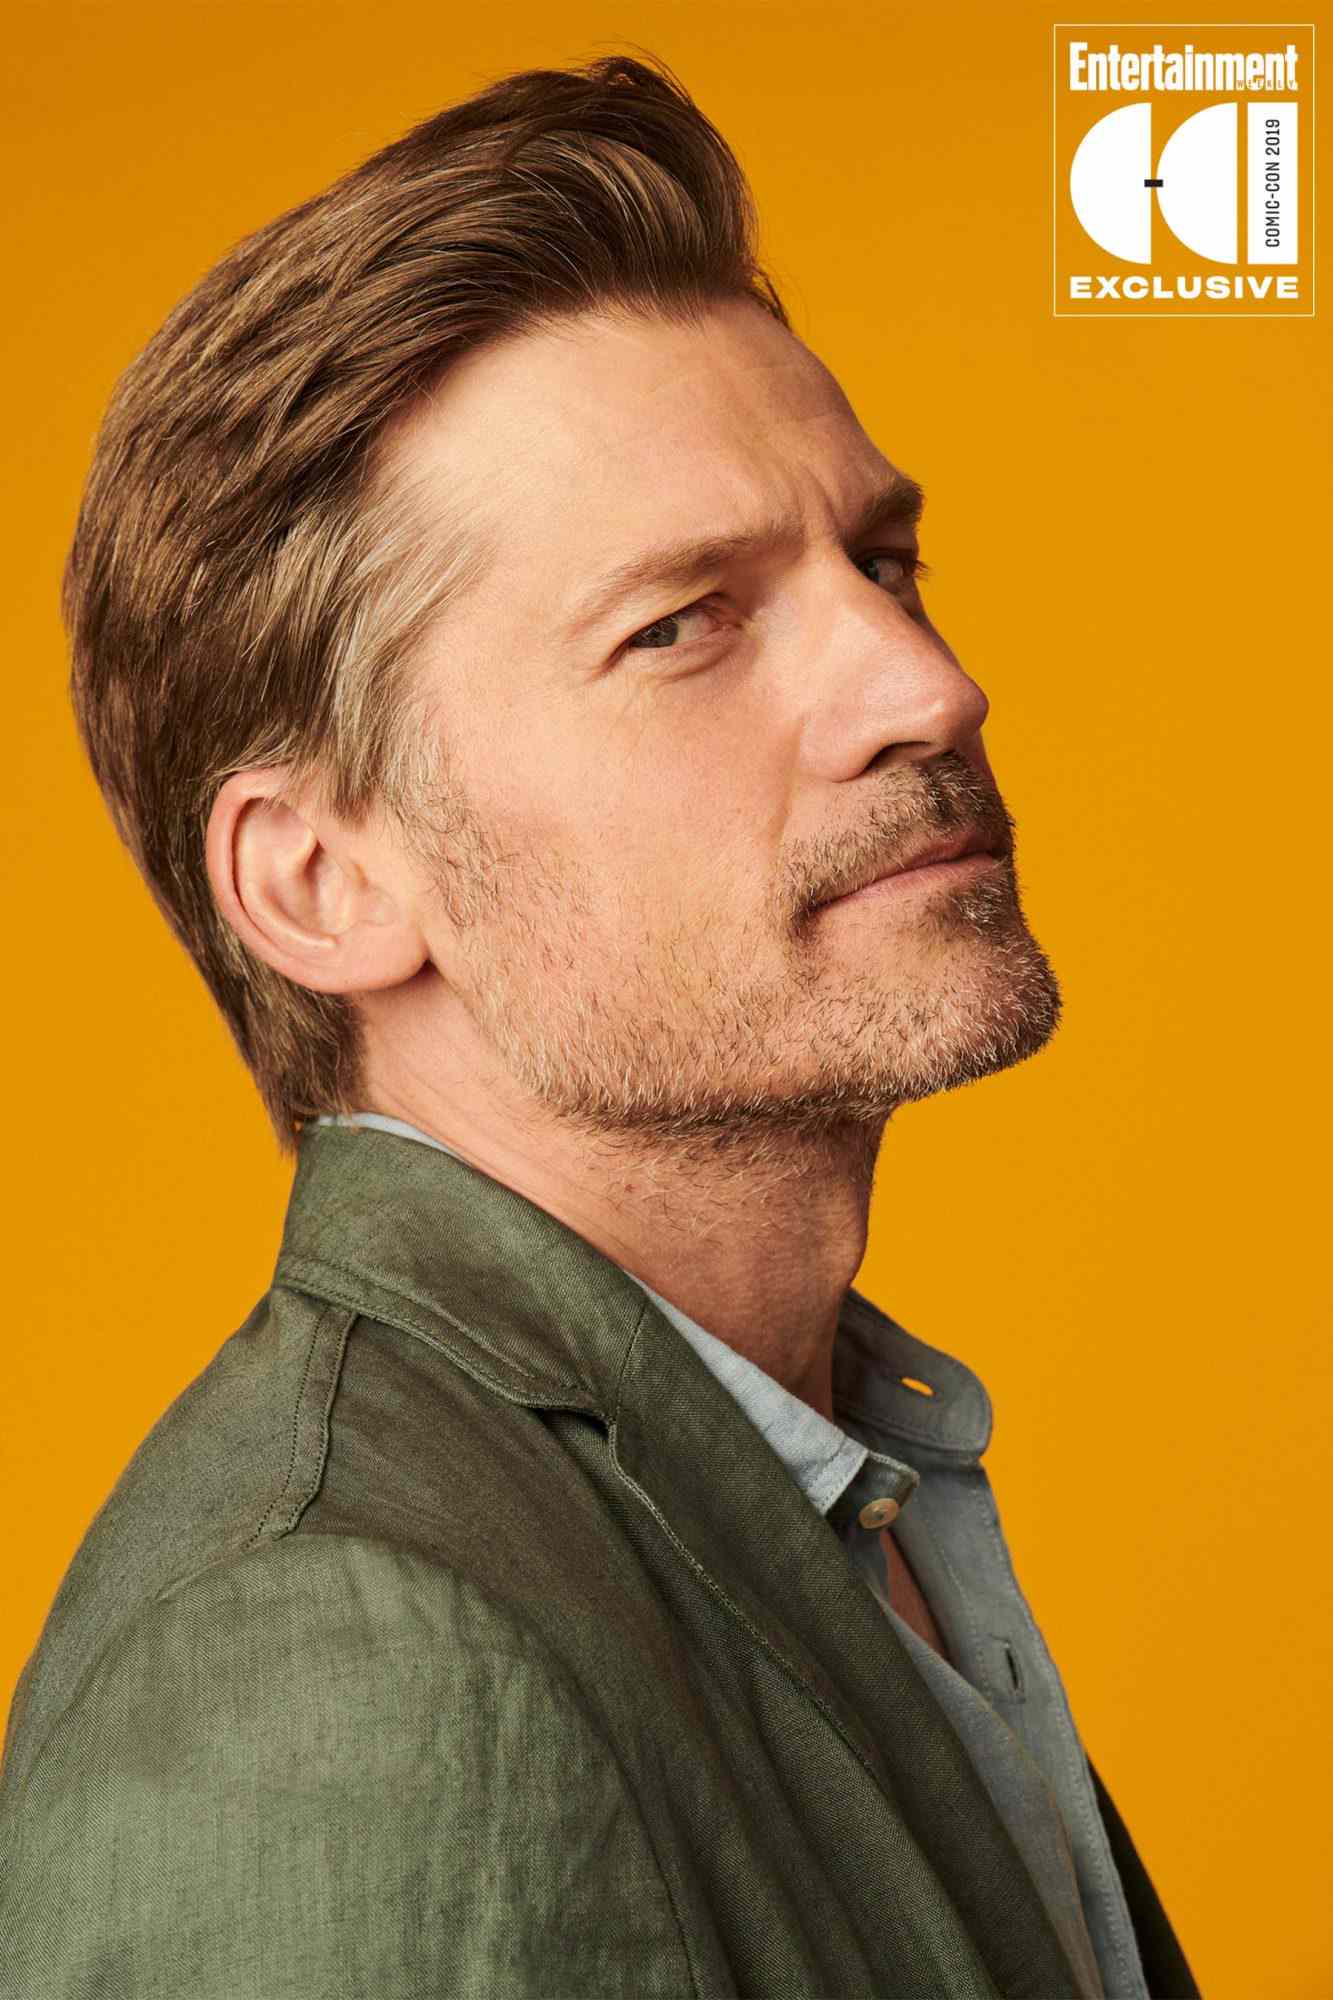 Day 1 - 2019 SDCC - San Diego Comic-Con Nikolaj Coster-Waldau photographed in the Entertainment Weekly portrait studio during the 2019 San Diego Comic Con on July 18th, 2019 in San Diego, California. Photographed by: Eric Ray Davidson Pictured: Nikolaj Coster-Waldau Film/Show: Game of Thrones